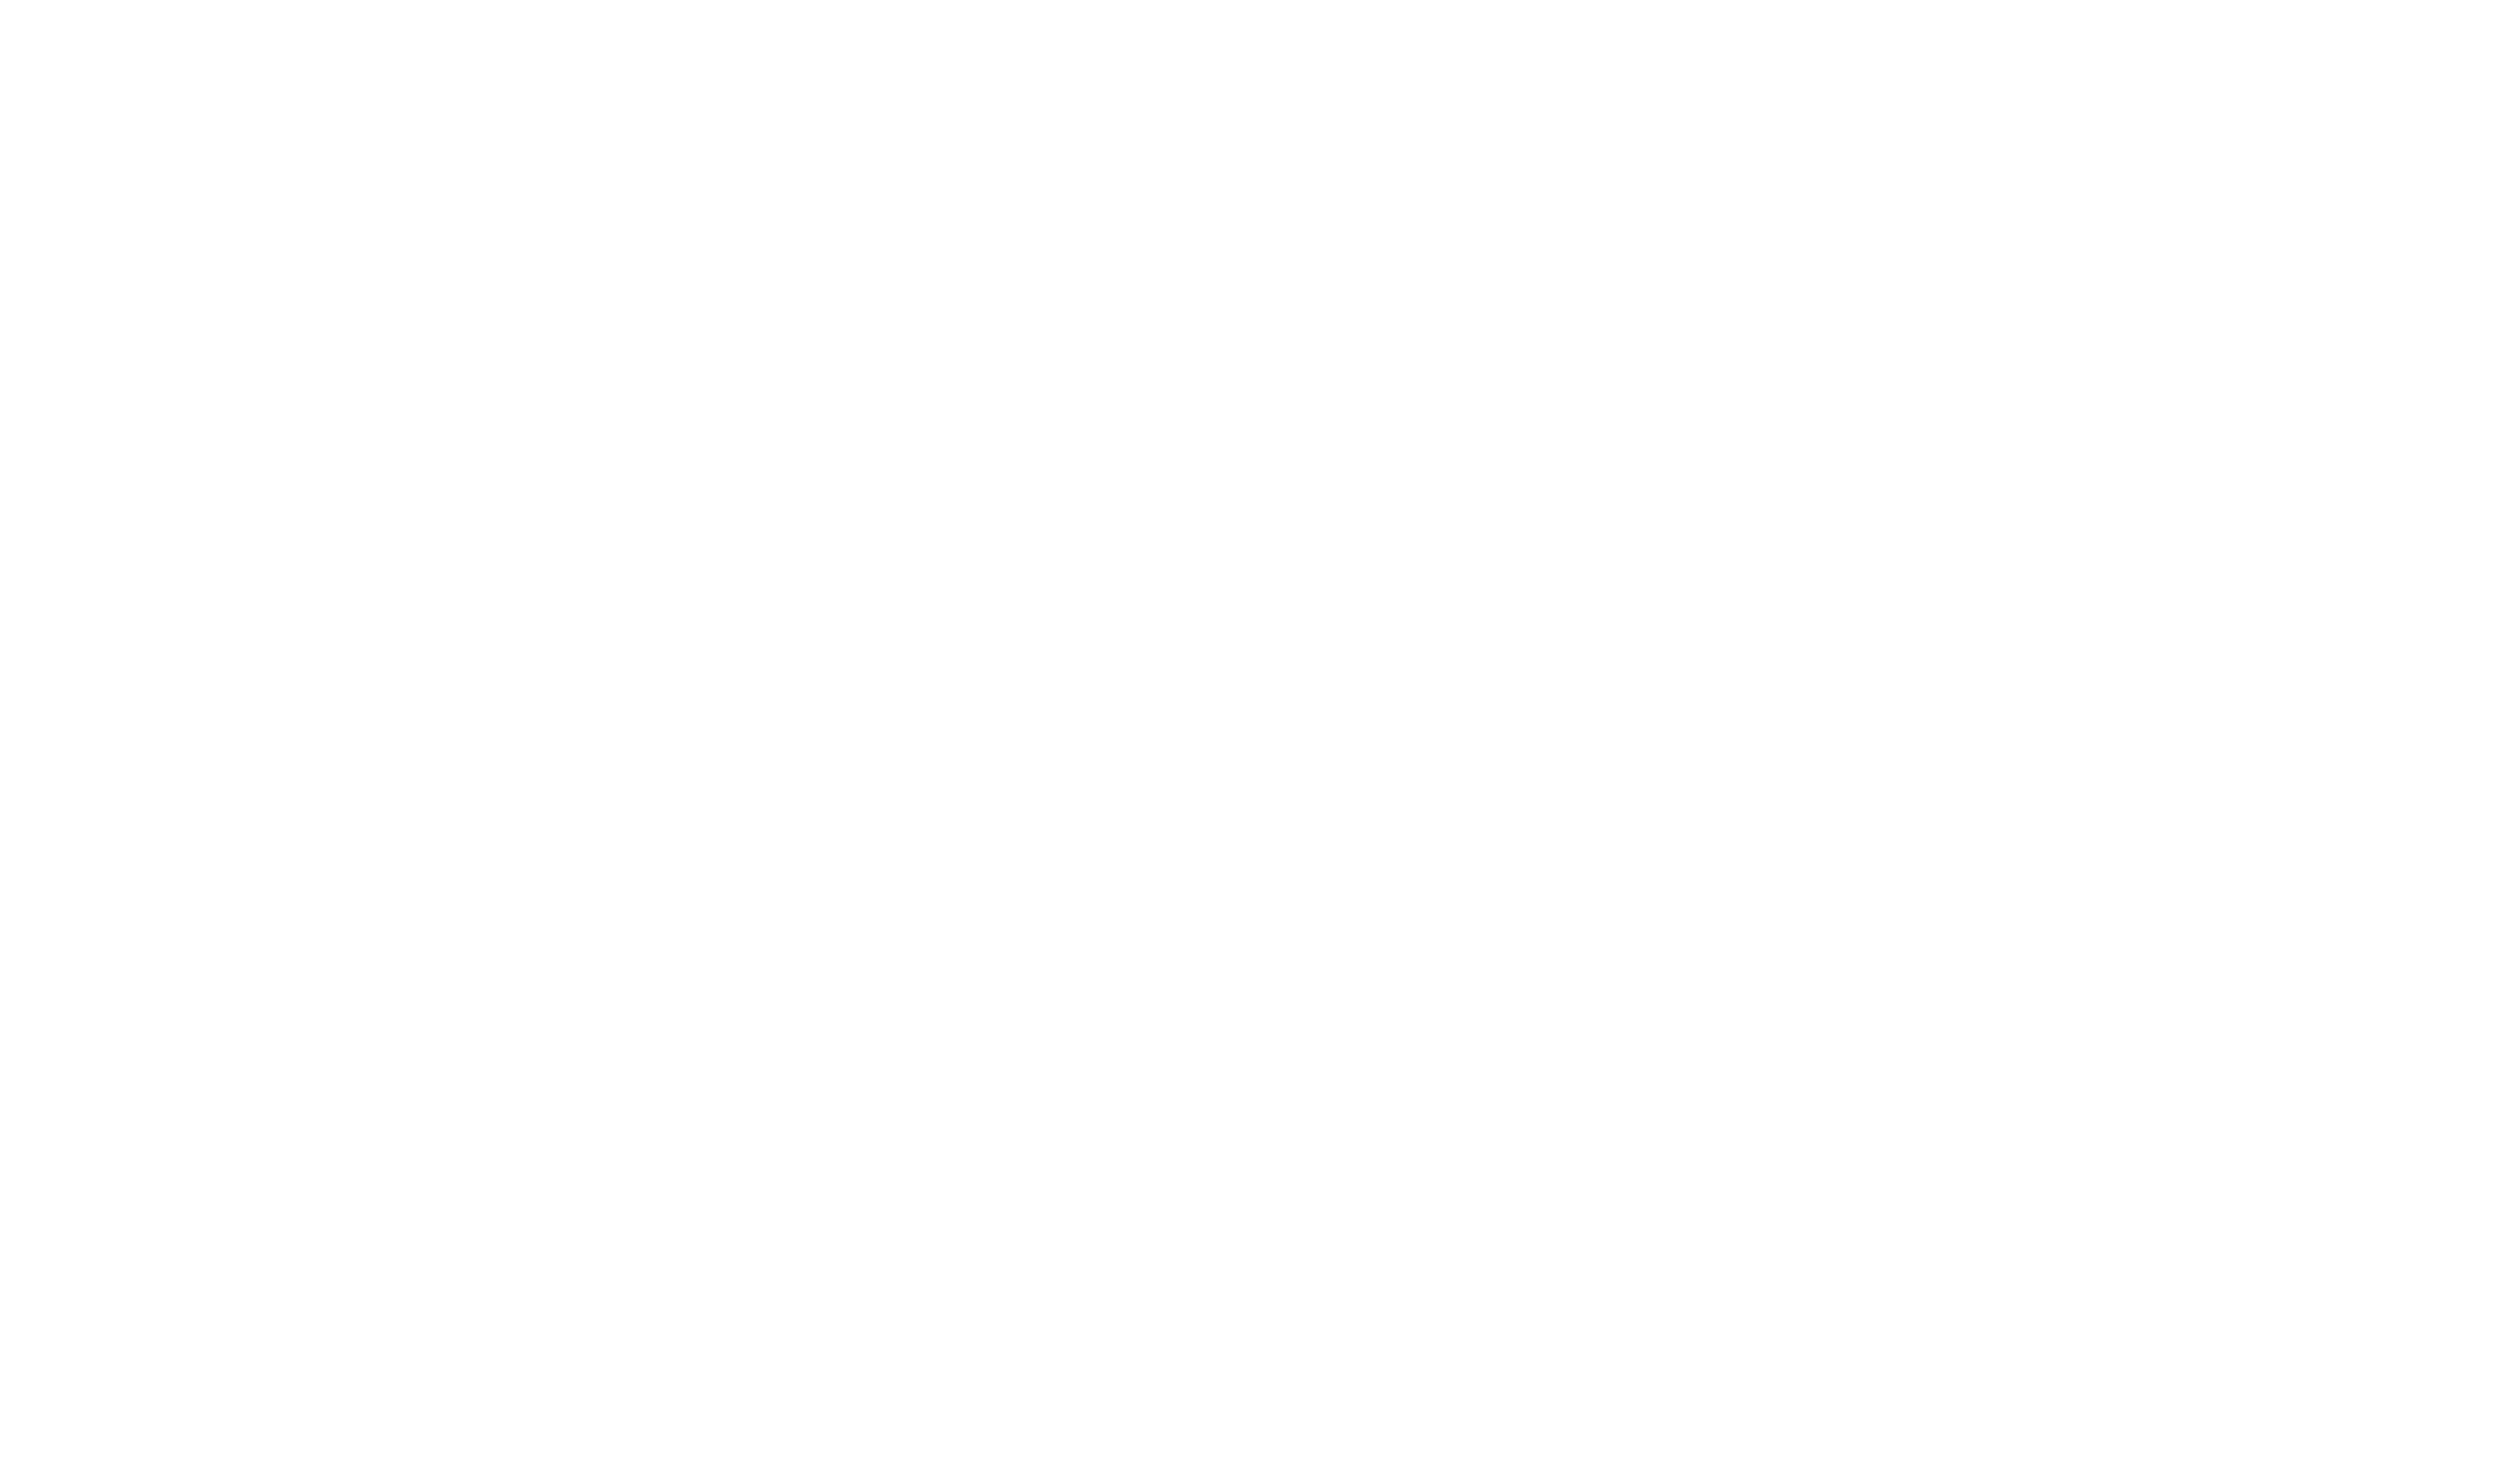 logo_project_event